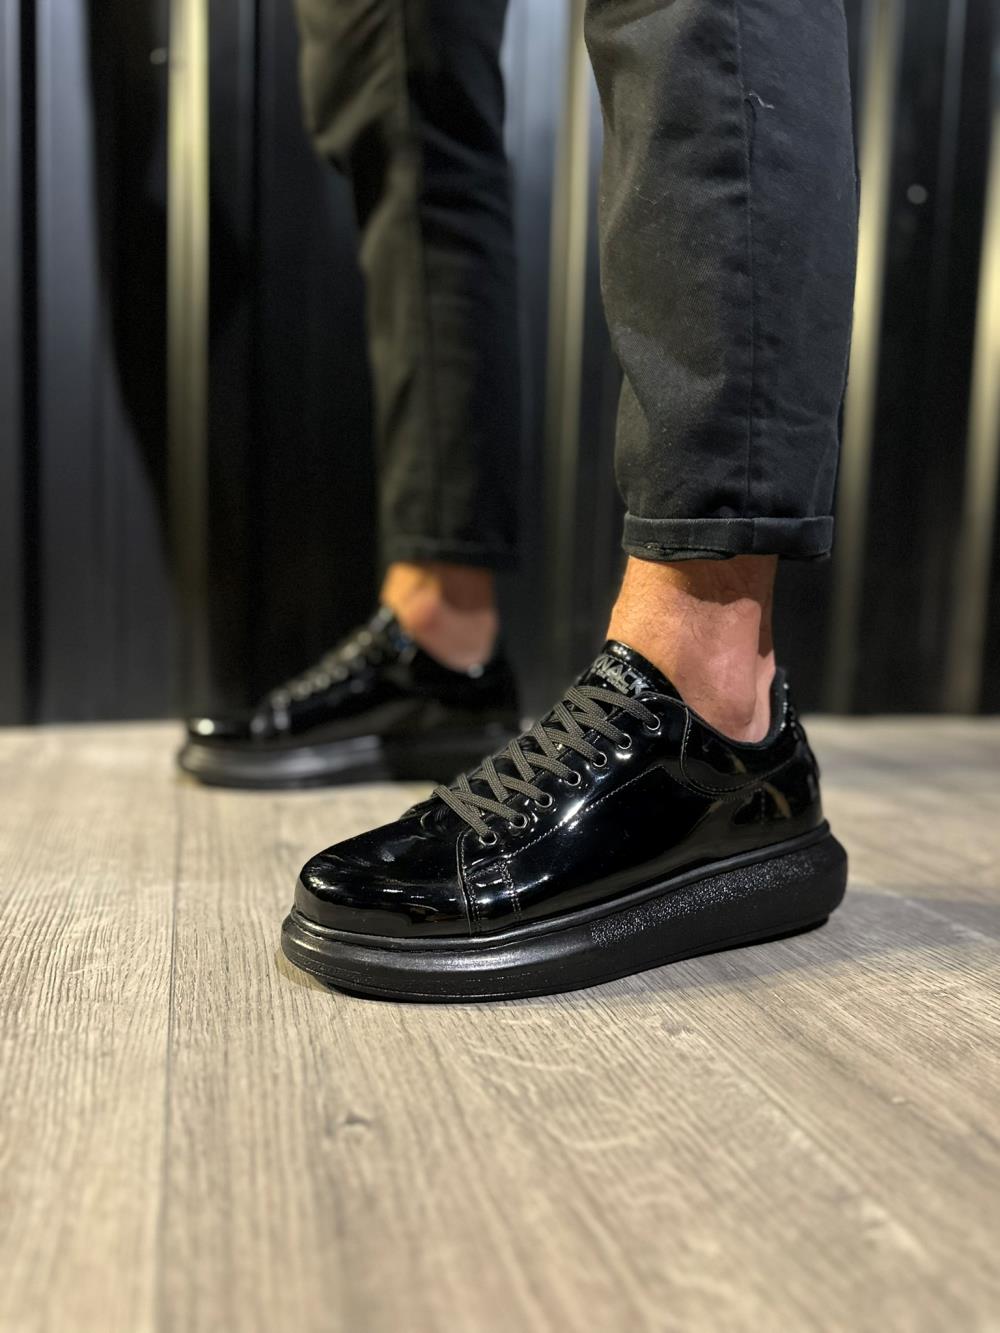 Men's High Sole Casual Shoes 044 Black Patent Leather (Black Sole) - STREETMODE ™